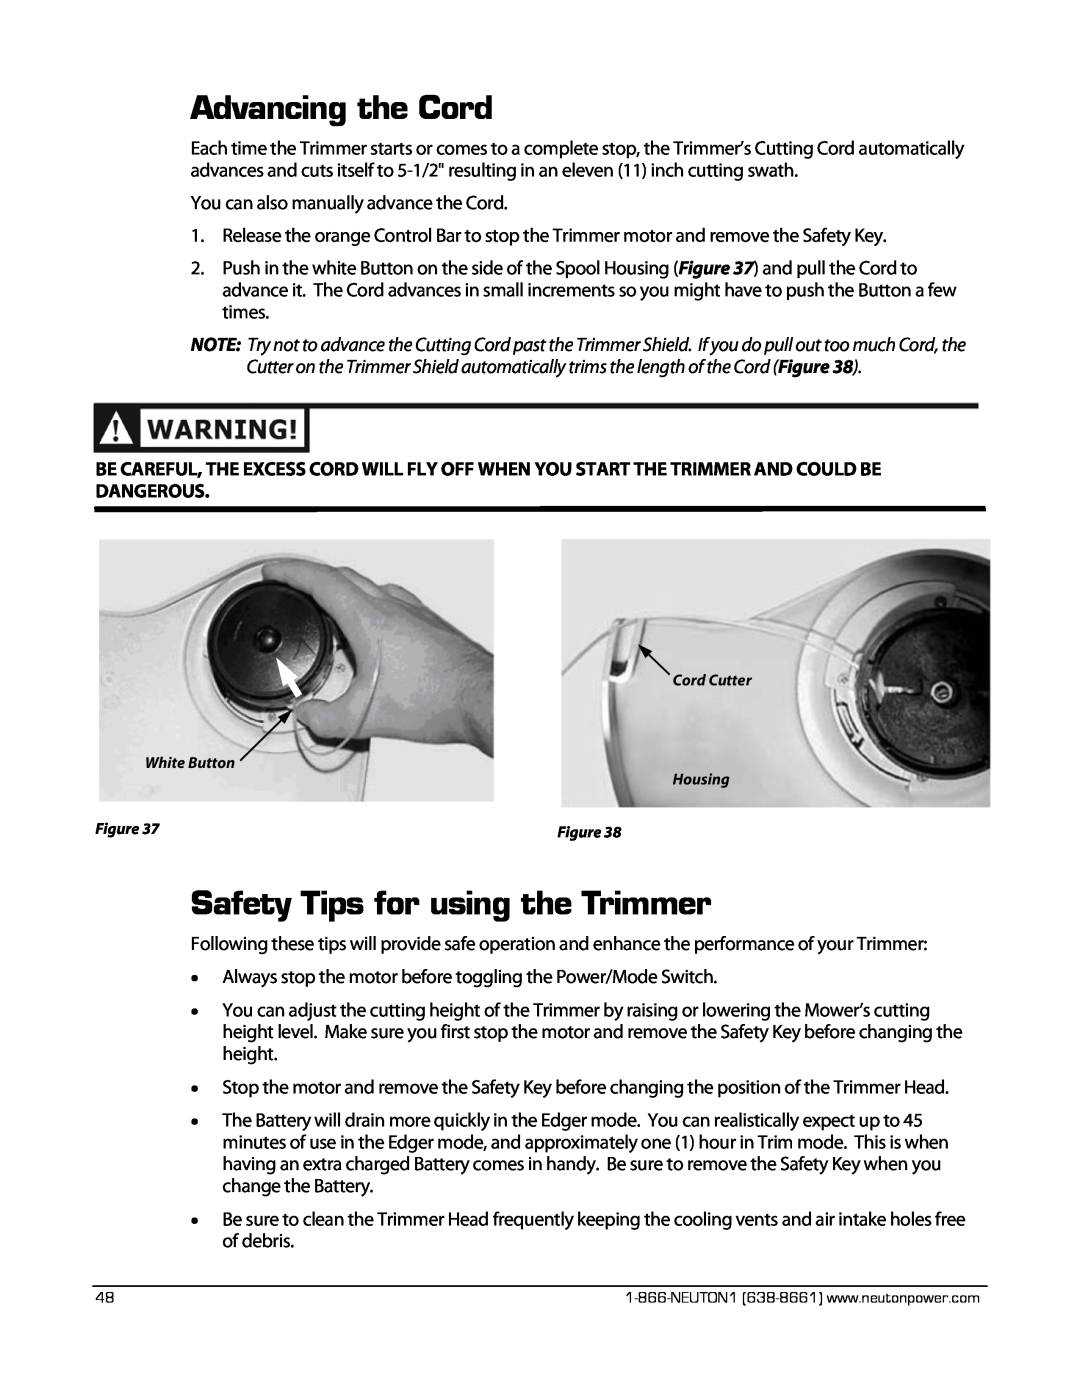 Neuton CE 6.2 manual Advancing the Cord, Safety Tips for using the Trimmer 